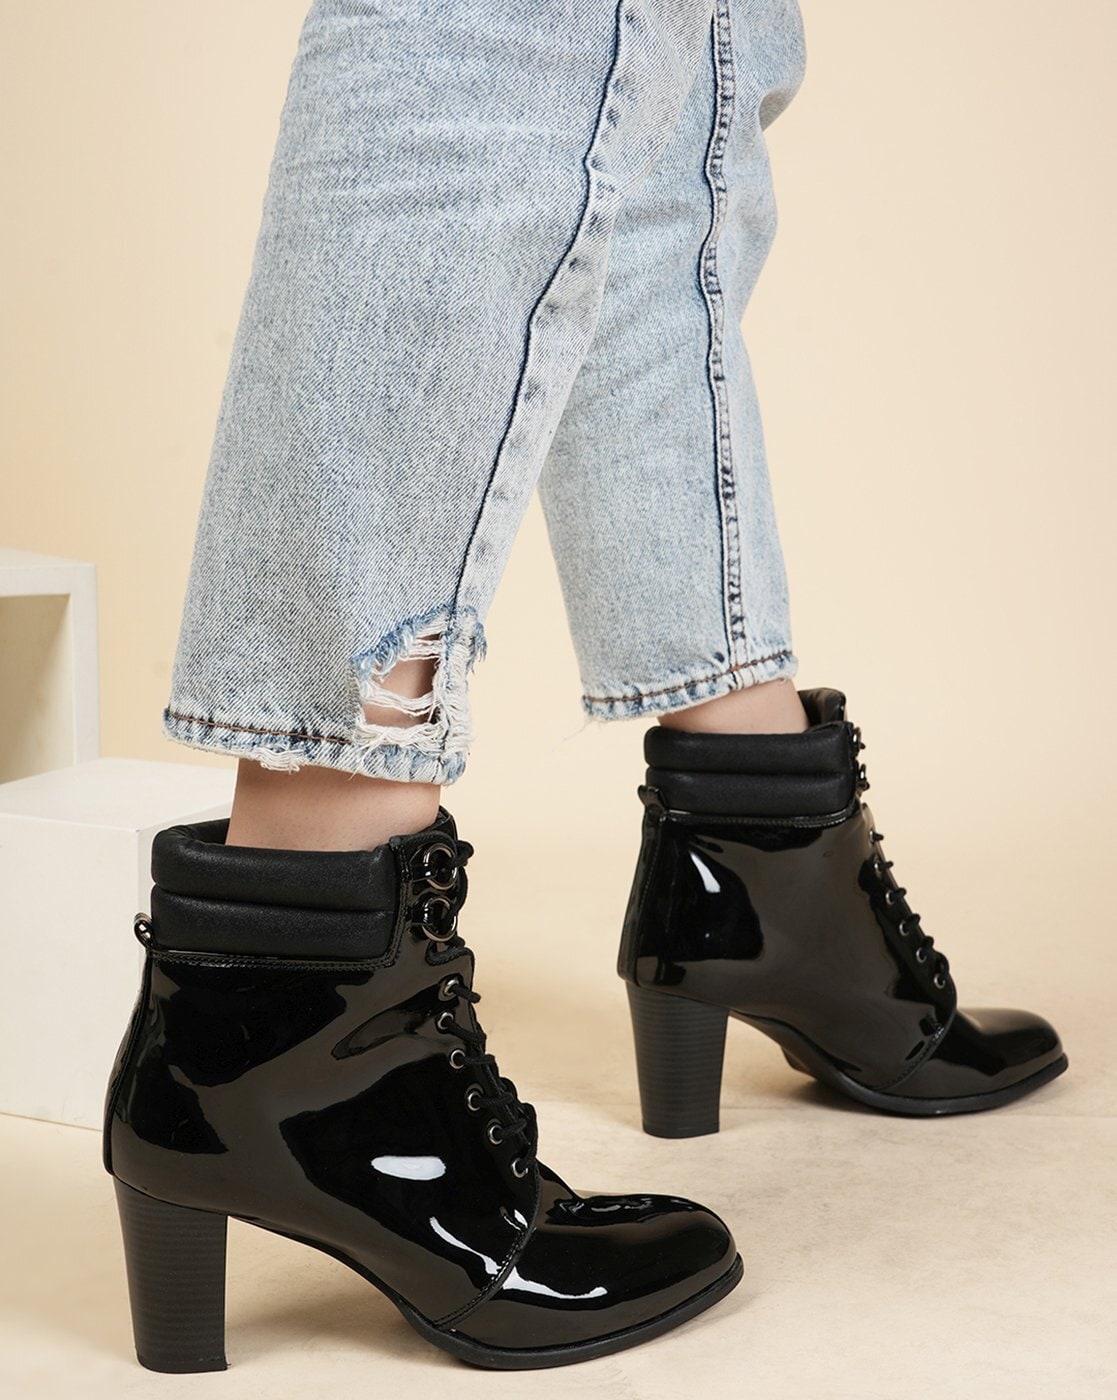 Leather Ankle Boots Women Fashion Lace Up Shoes Low Heels Party Short Shoes  - My Online Collection Store at Rs 4115.12, Bengaluru | ID: 2851553445333